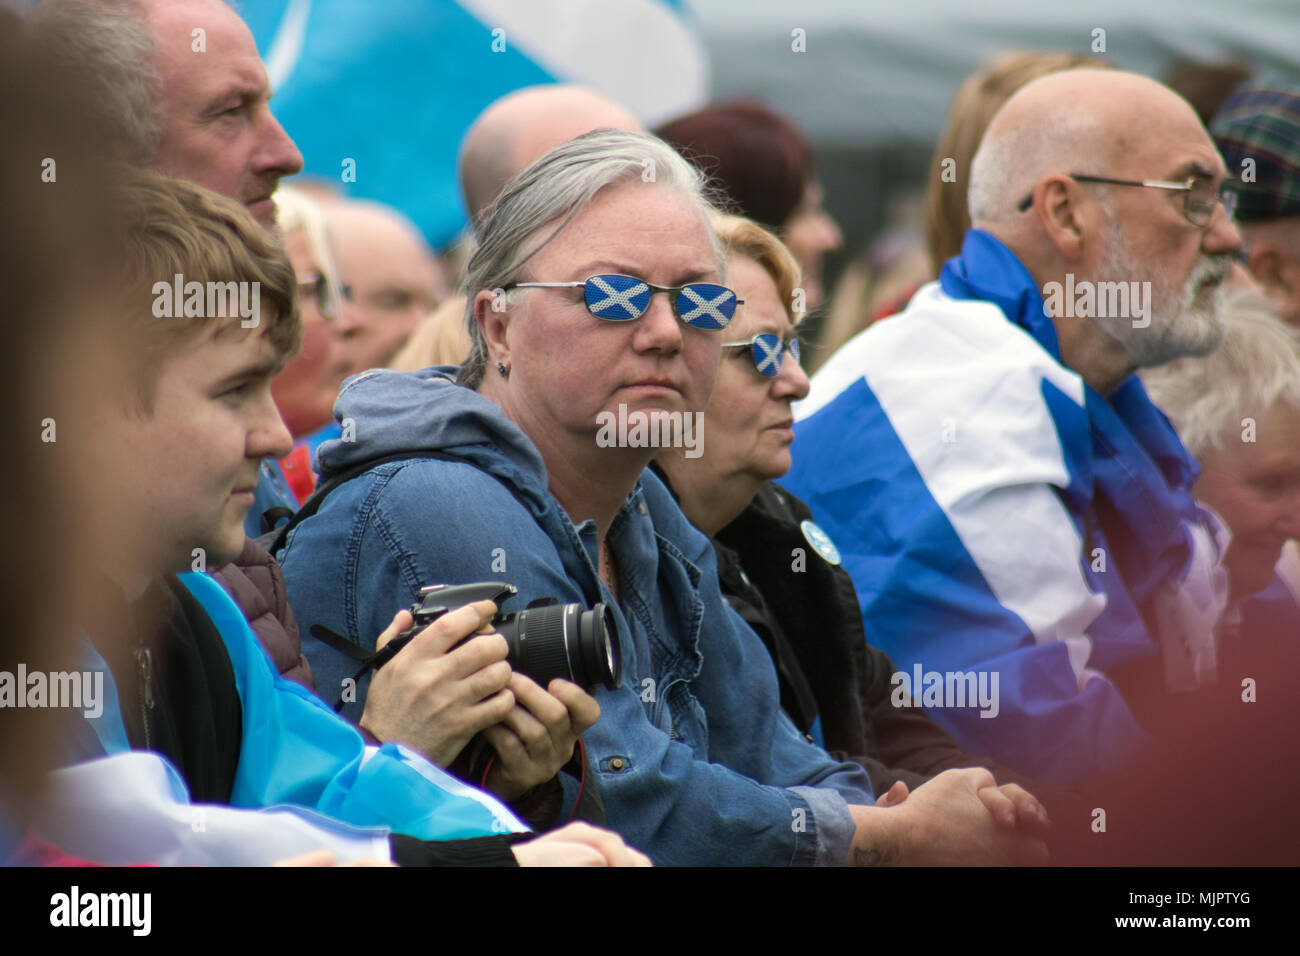 Glasgow, Scotland, UK. 5th May, 2018. March for Independence has taken place in Glasgow, with demonstrators travelling from Kelvingrove Park, through the West End and into the city centre, and finally arriving at Glasgow Green, where there was a stage with political speakers and entertainment. People of all ages were draped in Saltires and waving their flags. According to Police Scotland, an estimated 35,000 pro-Indy supporters took part. The organisers, All Under One Banner (AUOB), claim an even higher figure. Iain McGuinness / Alamy Live News Stock Photo